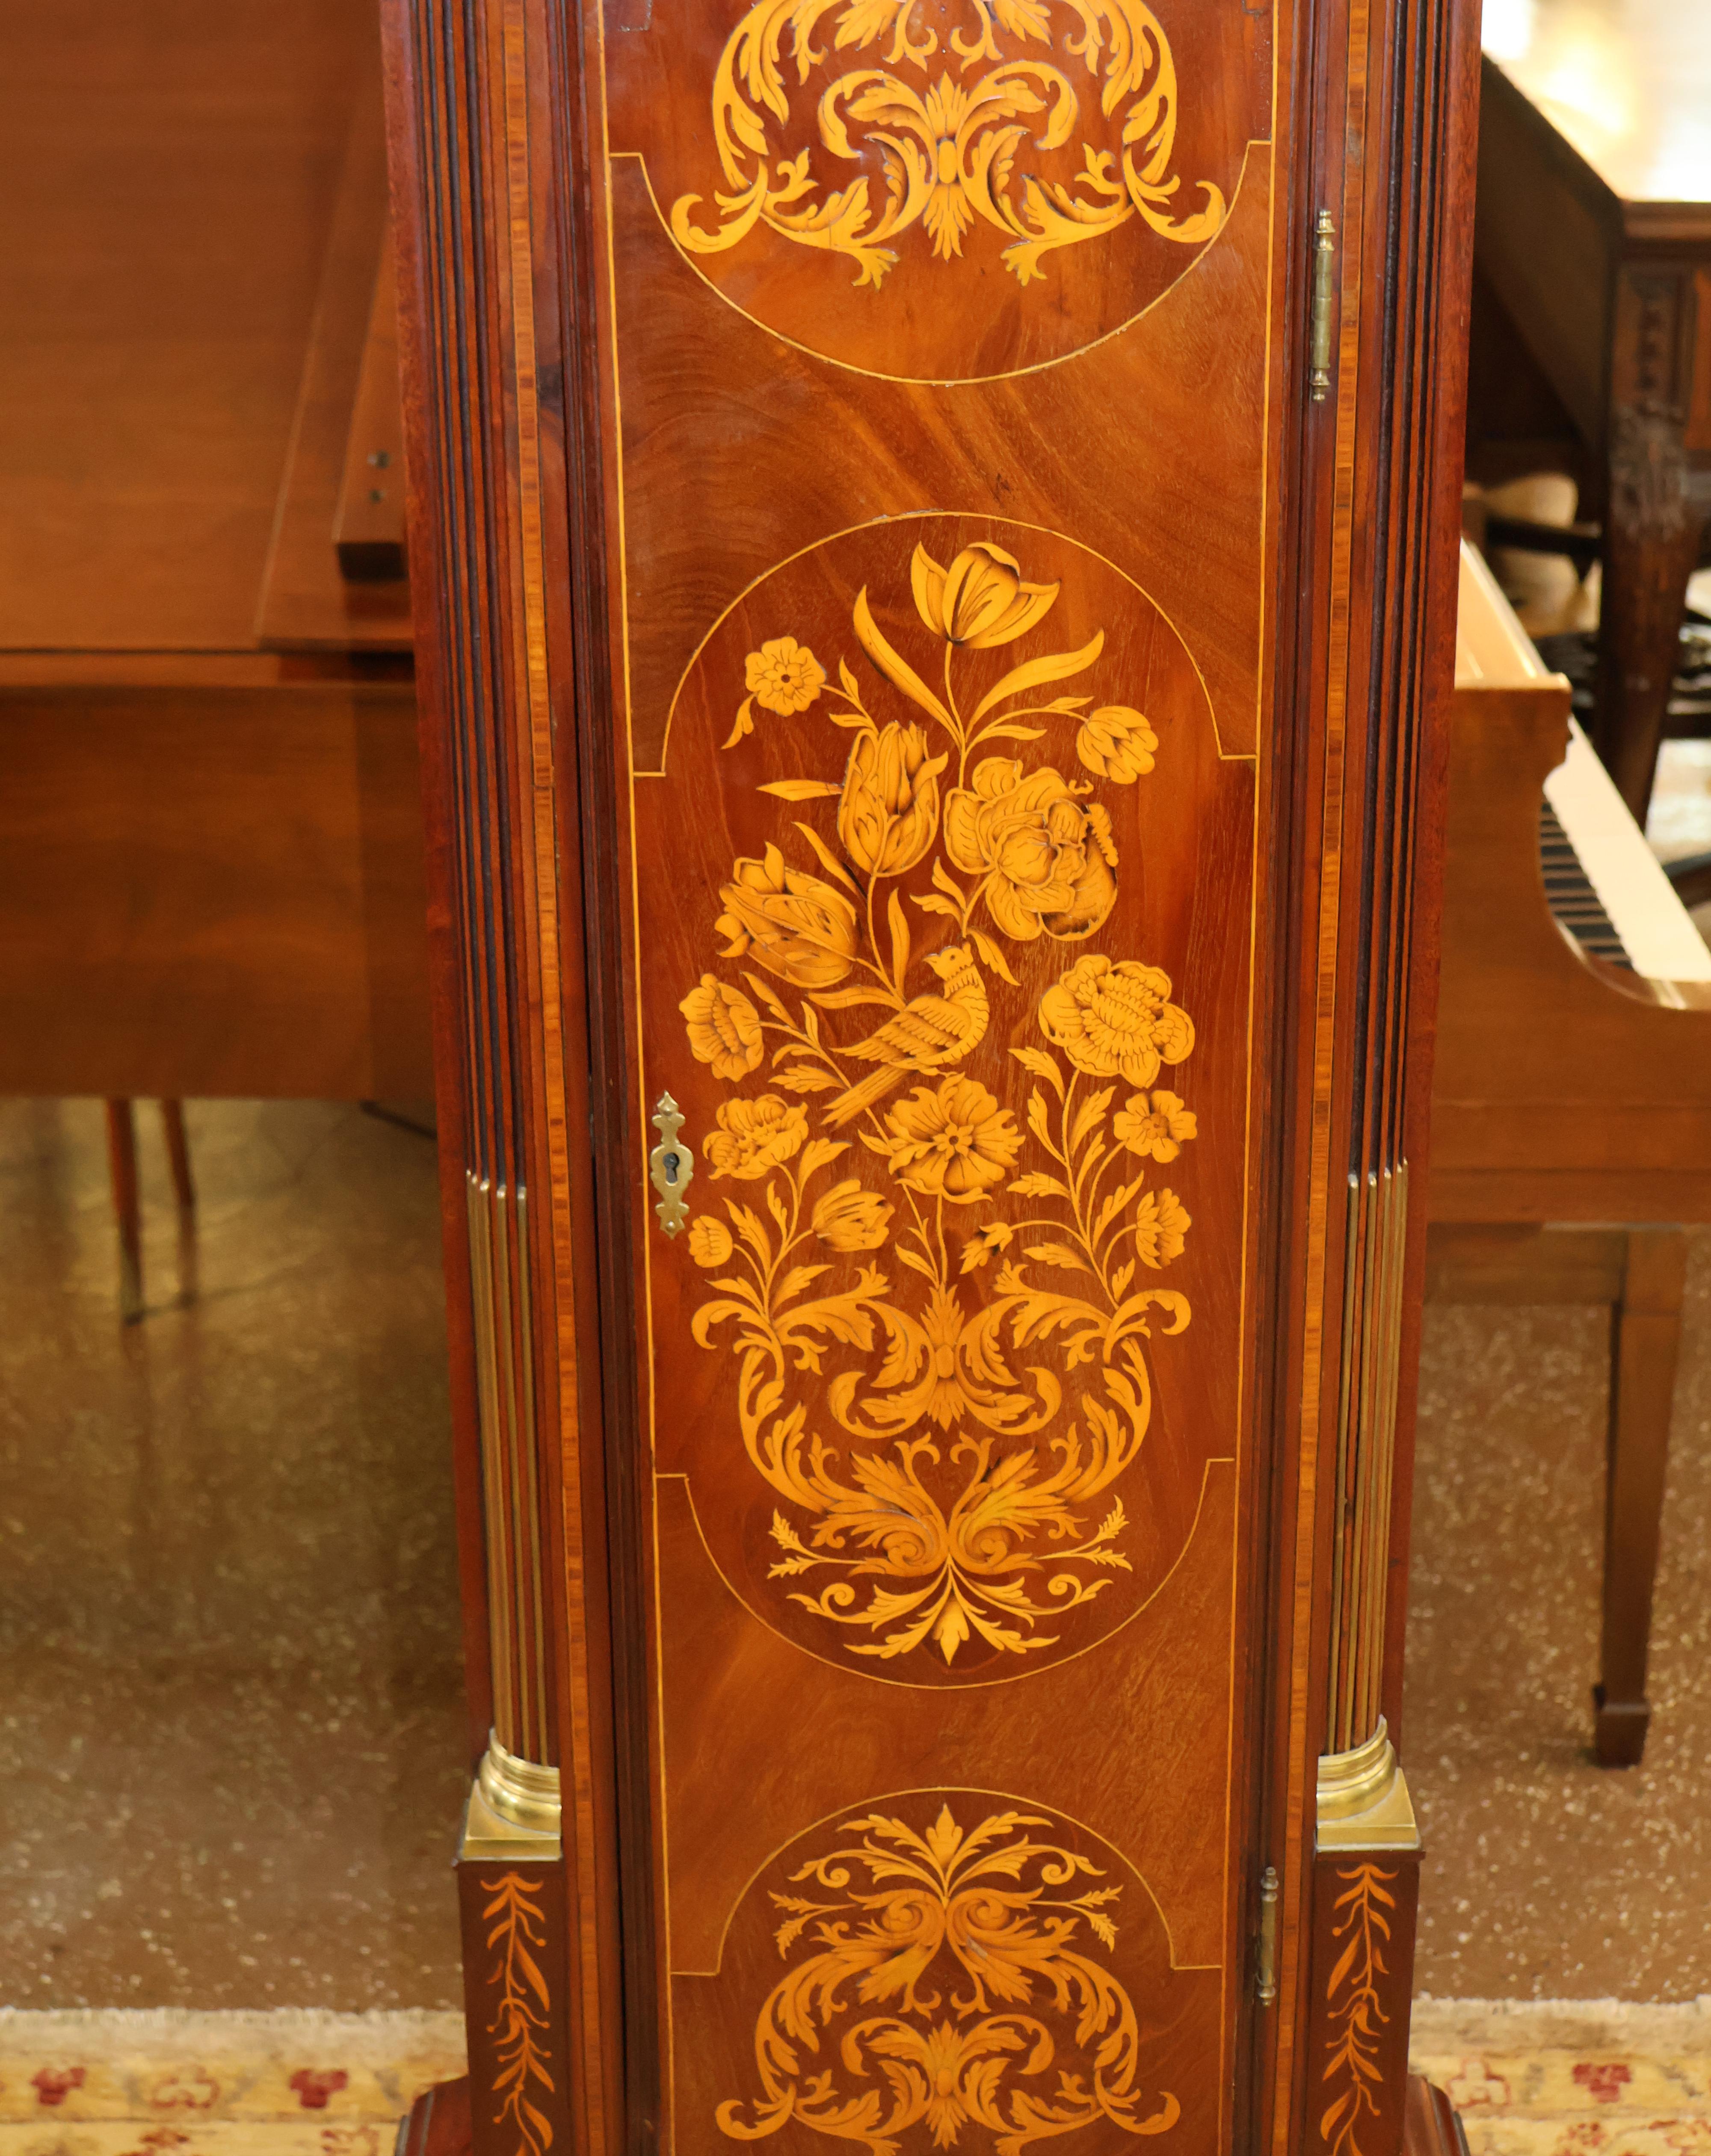 Herbert Blockley London Musical 19th Century Inlaid Tall Case Grandfather Clock For Sale 4